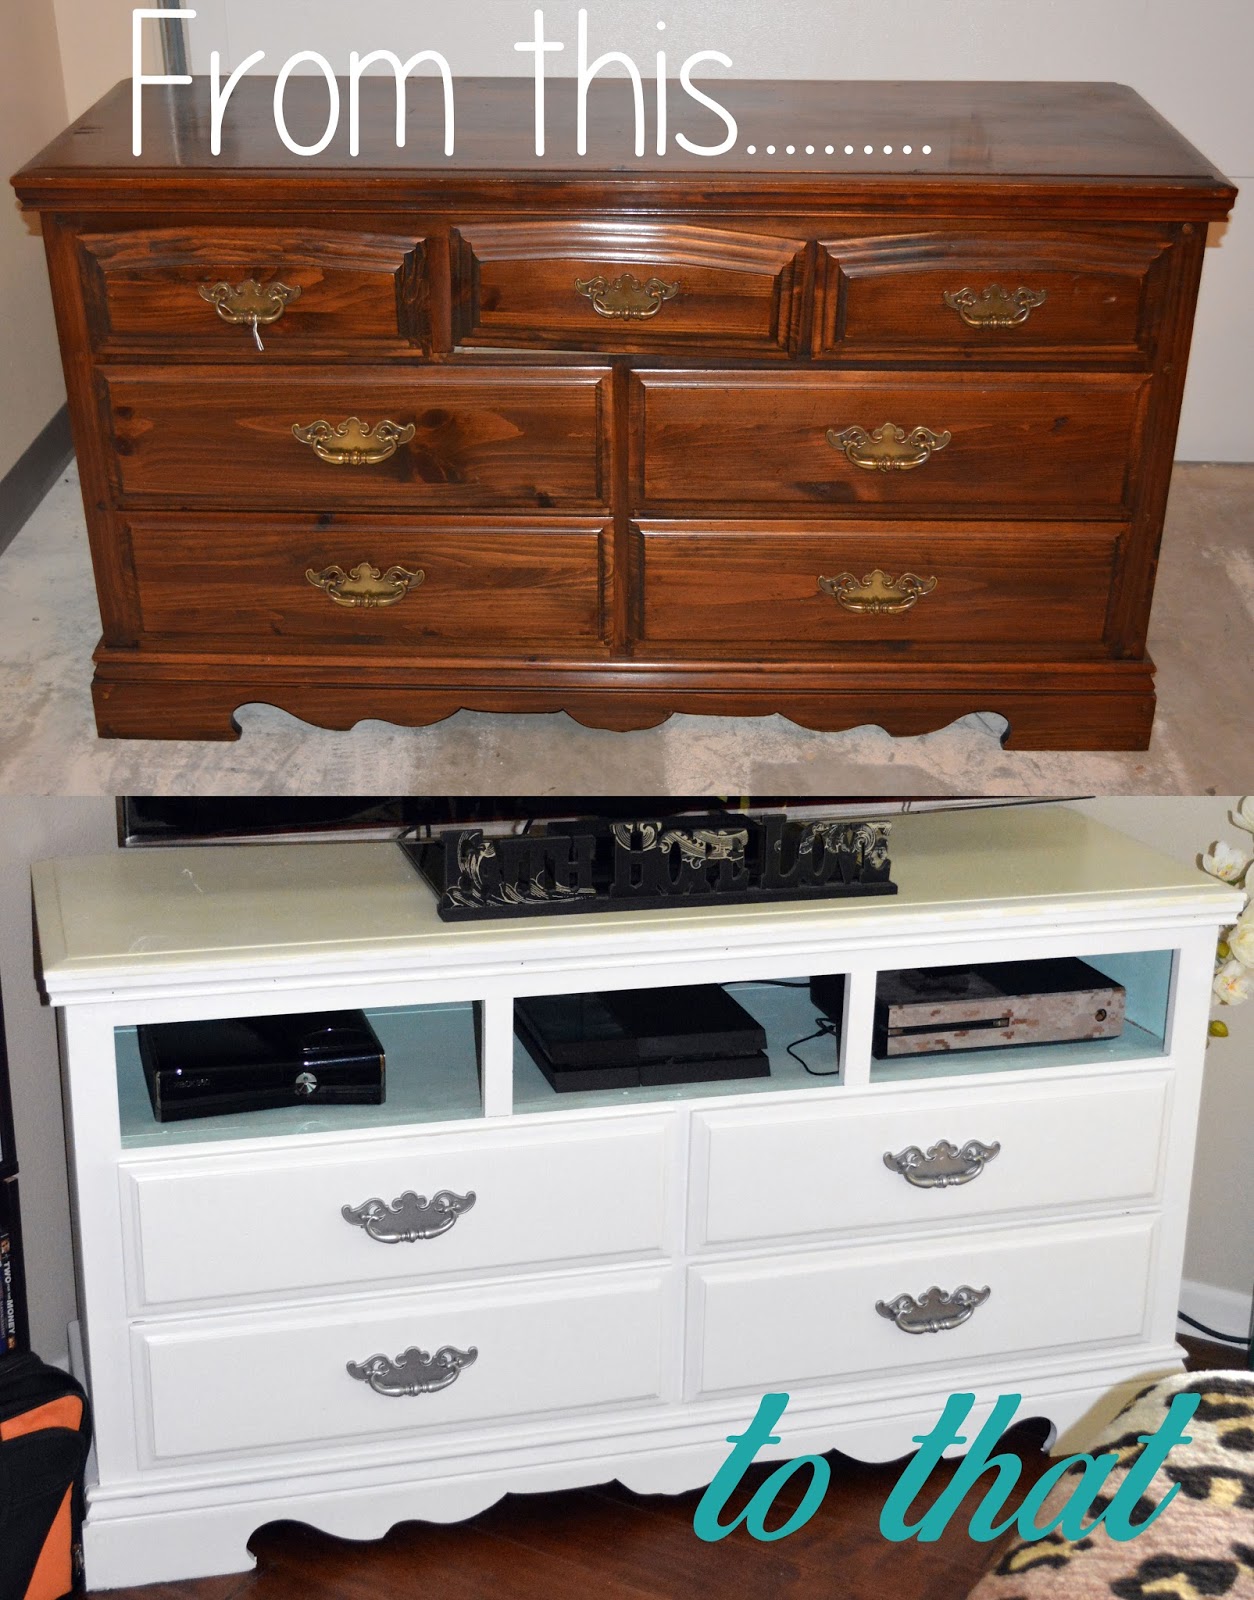 So Miscellaneous: DIY Dresser to TV Stand